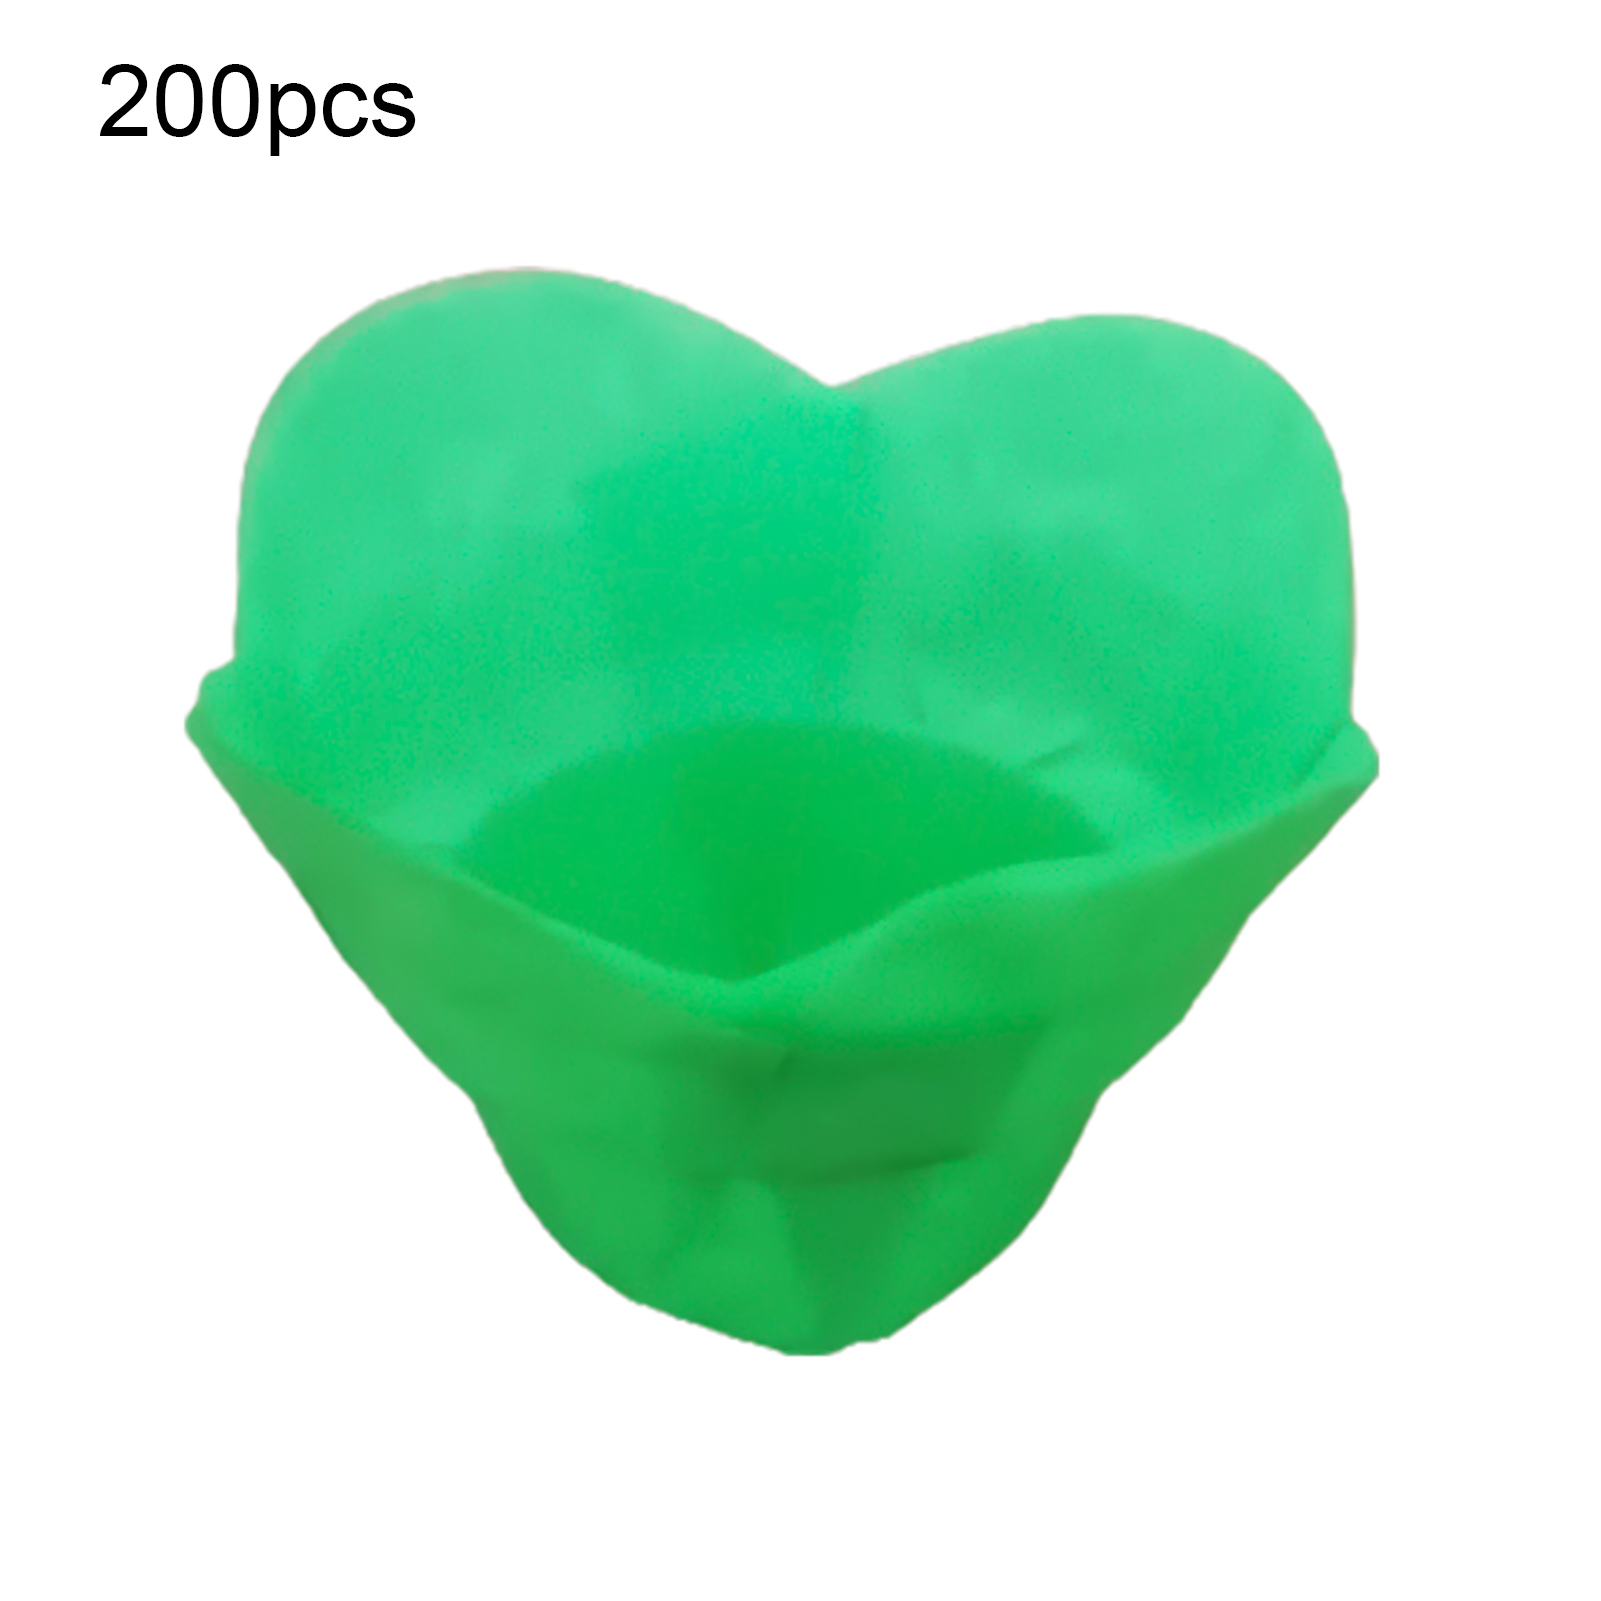 Details about   CW_ Non-stick Cake Waffle Biscuit Silicone Mold Kitchen Bakeware Baking Tools  B 